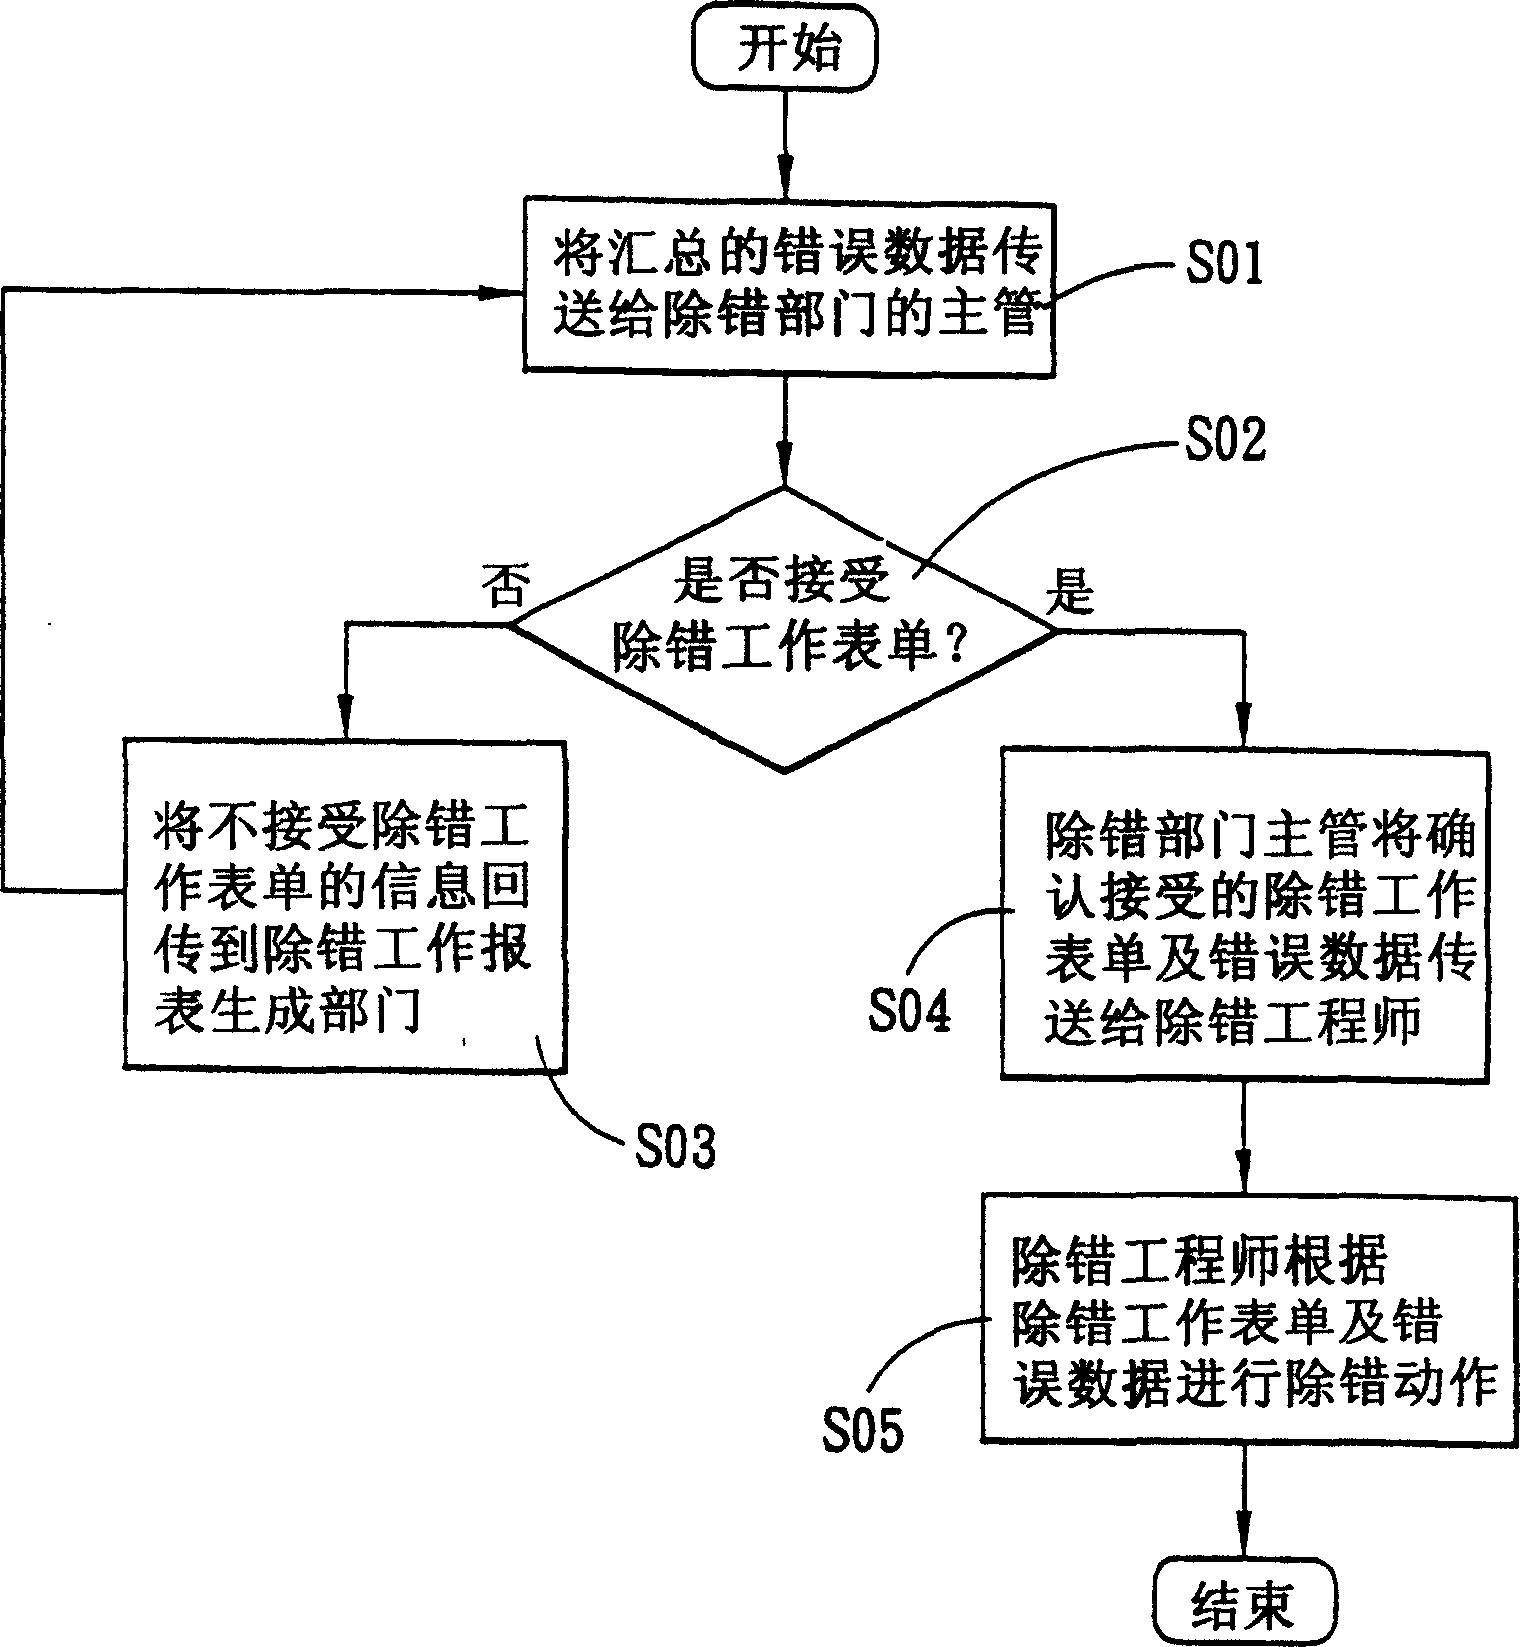 Work flow definition system and management system thereof